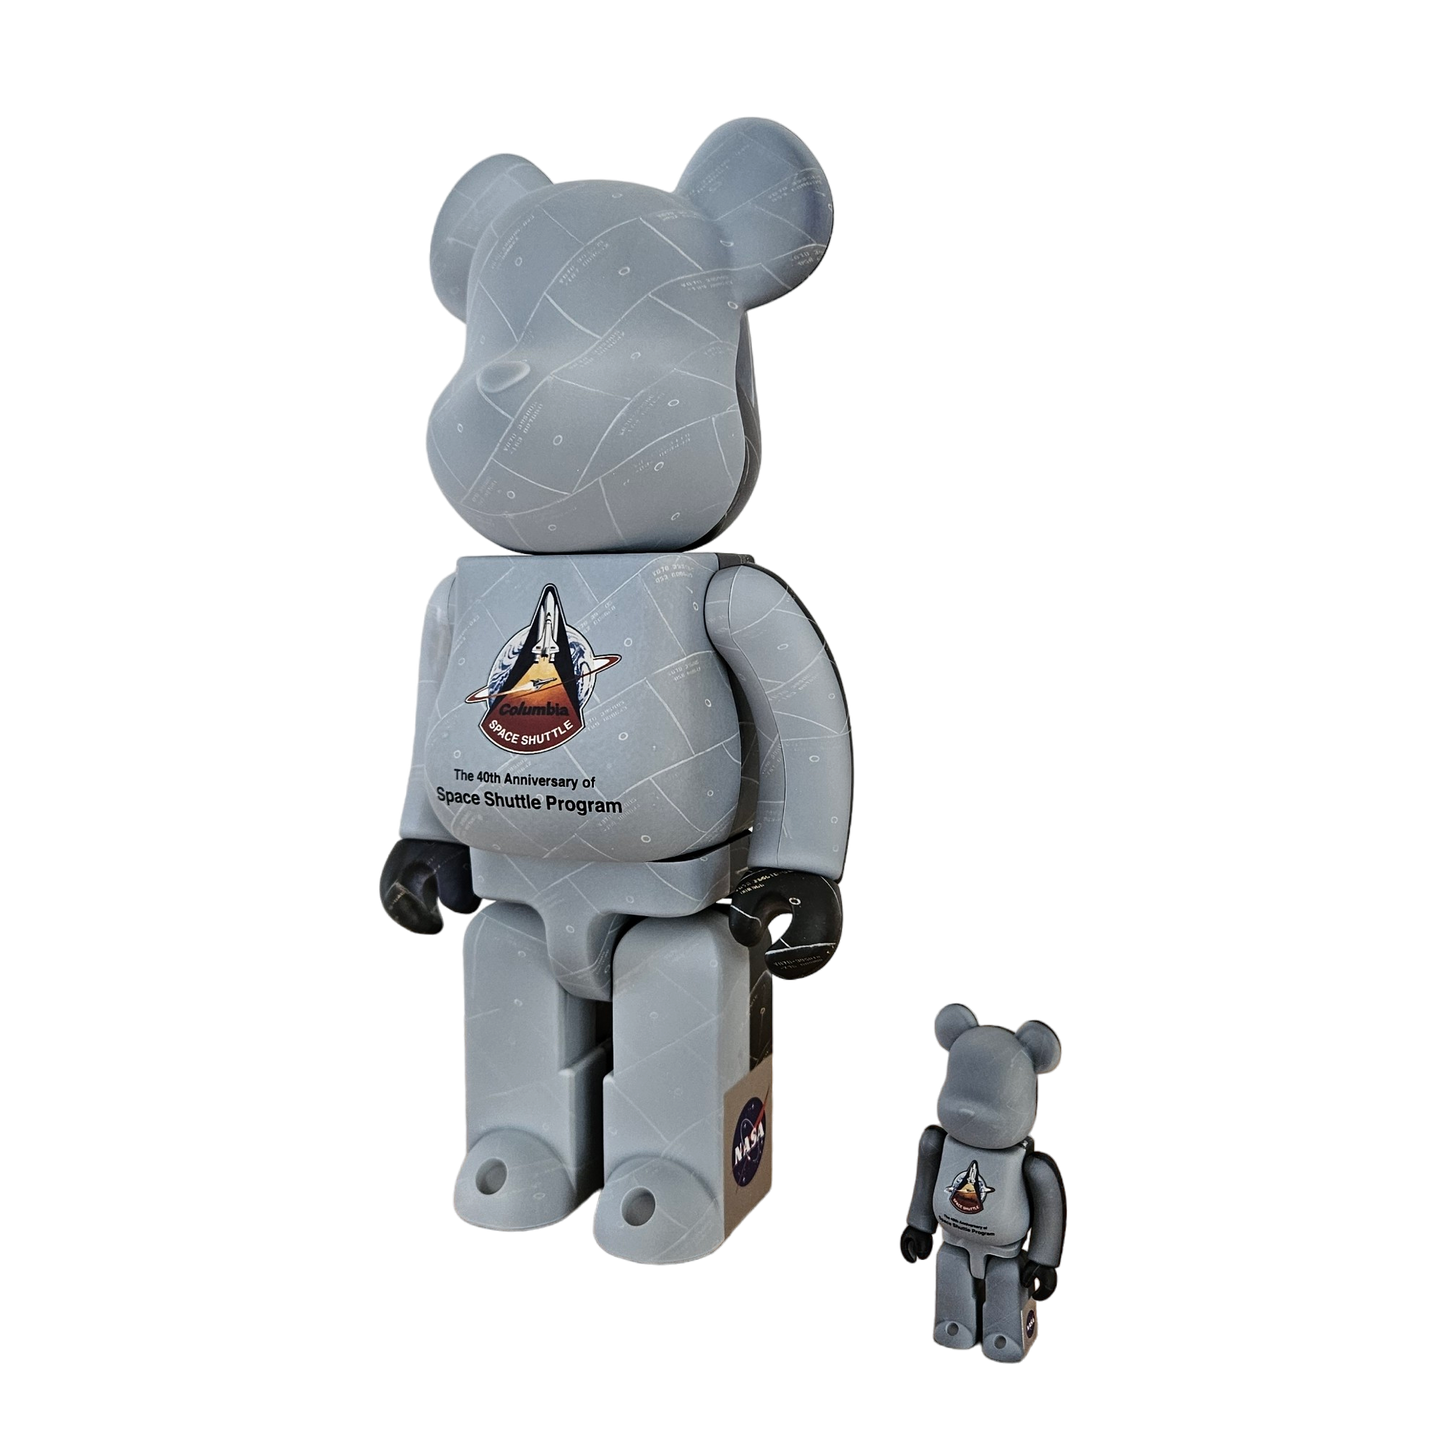 BE@RBRICK The 40th Anniversary of the Space Shuttle Program (100%+400%)